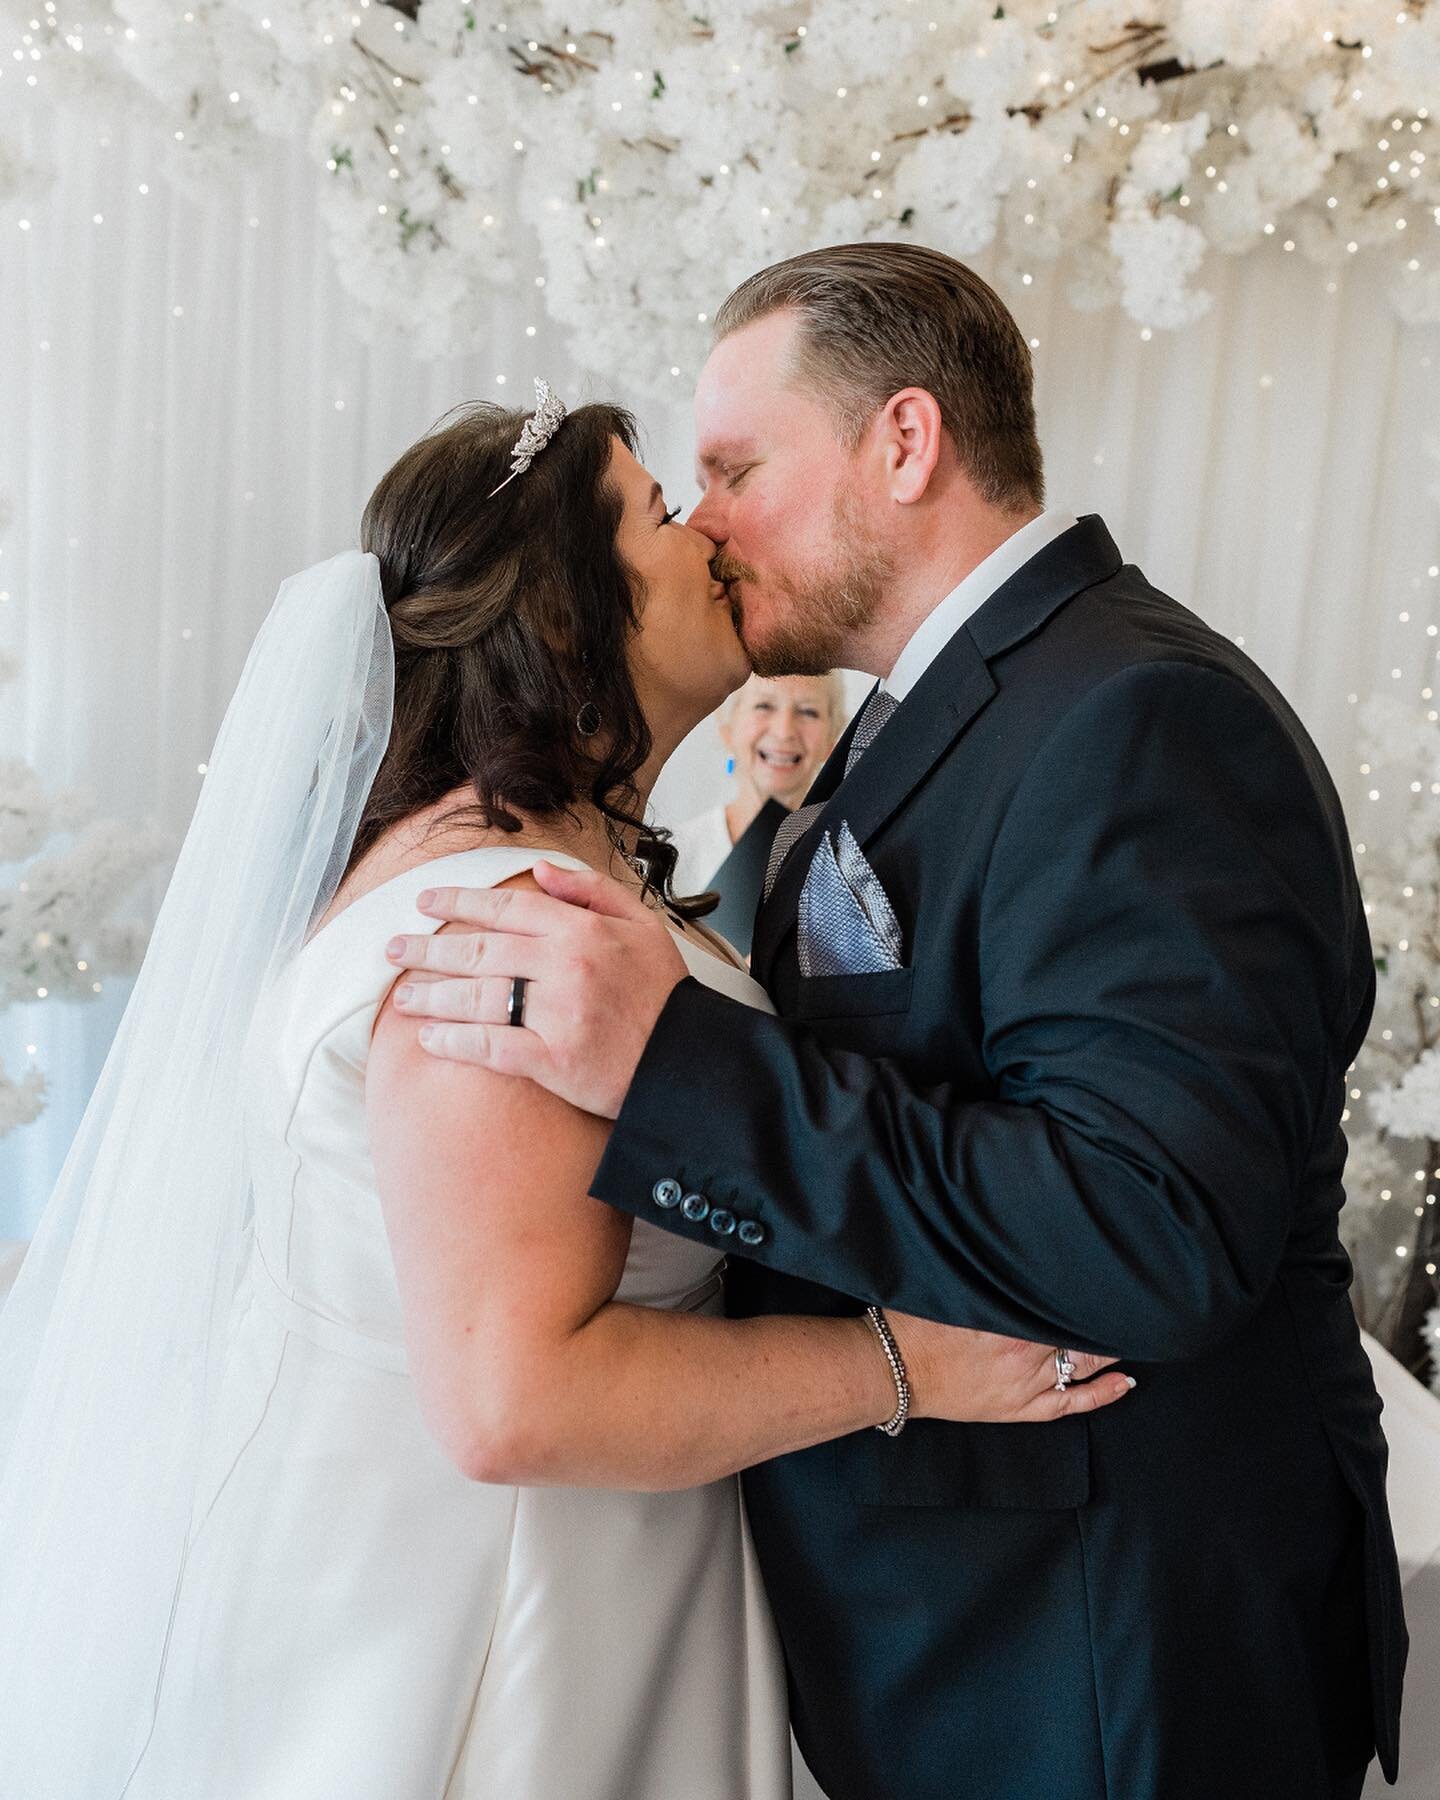 After jet-setting all the way from Canada, Leanne and Dave threw down an epic wedding that was straight-up fire! No joke, it was one of the most stunning days of the whole damn year. And even though they were sweating it out in those outfits, they ne